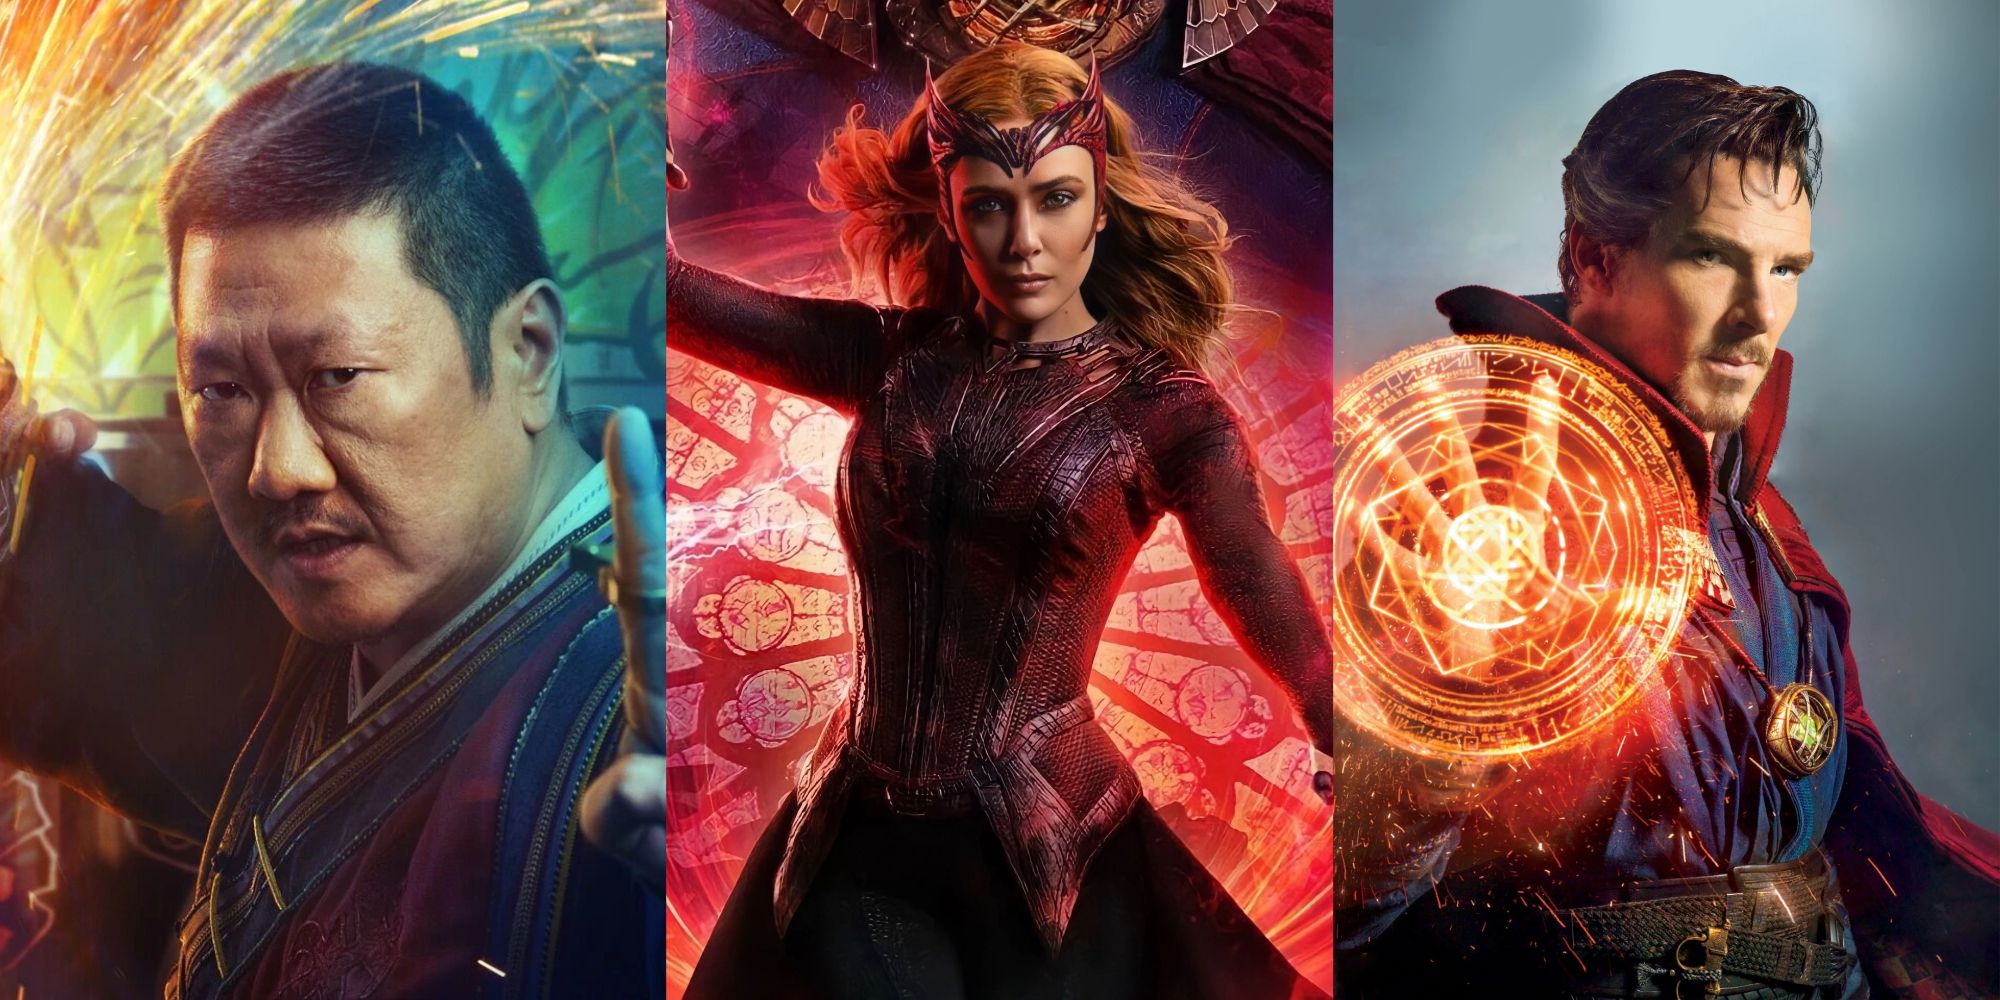 Split image of Wong, Scarlet Witch, and Doctor Strange from the MCU.